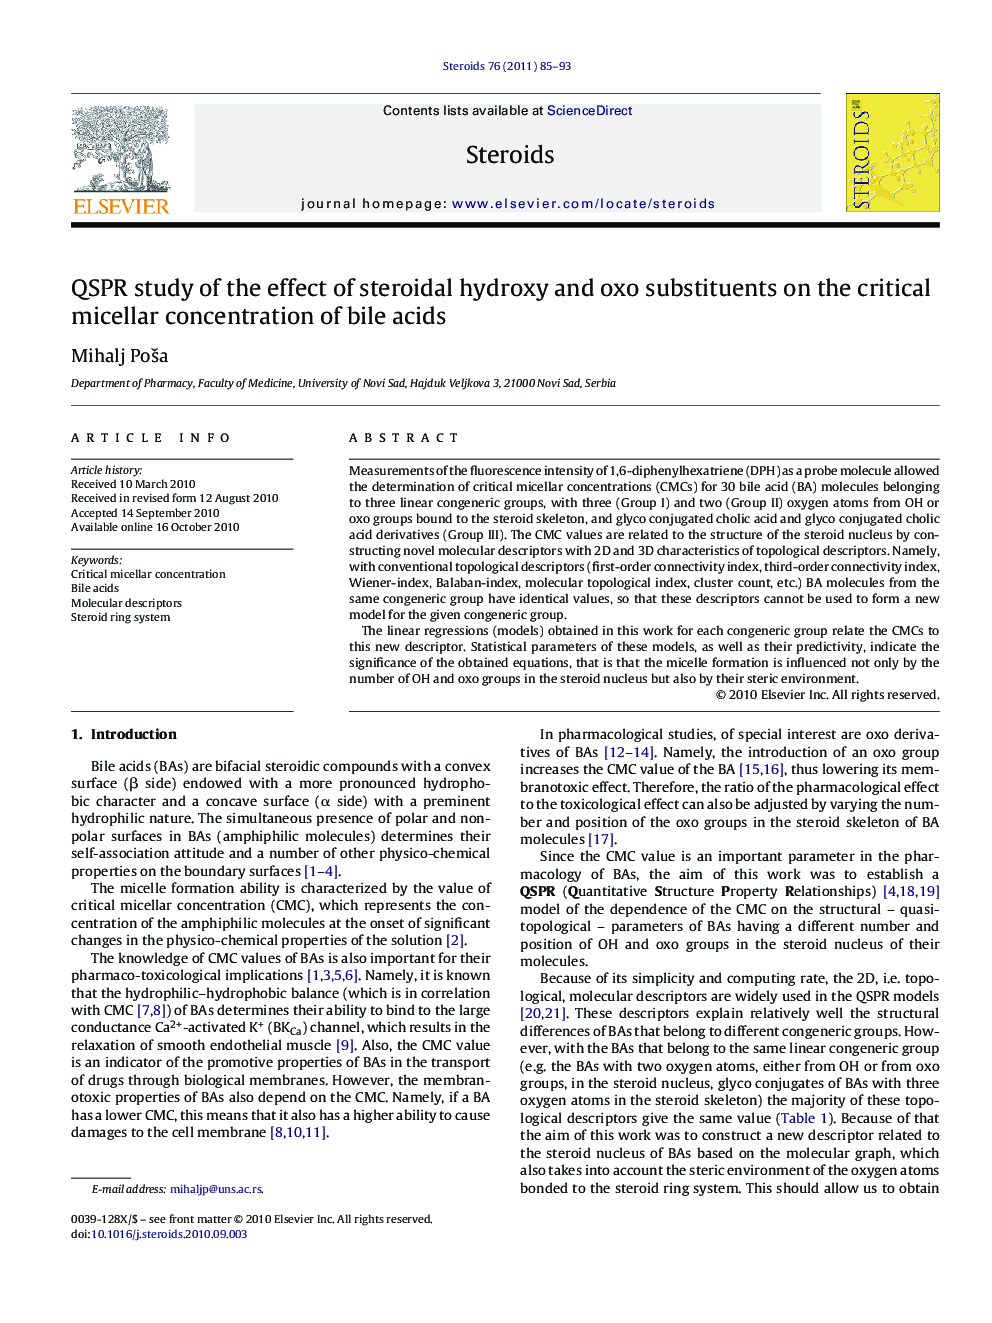 QSPR study of the effect of steroidal hydroxy and oxo substituents on the critical micellar concentration of bile acids